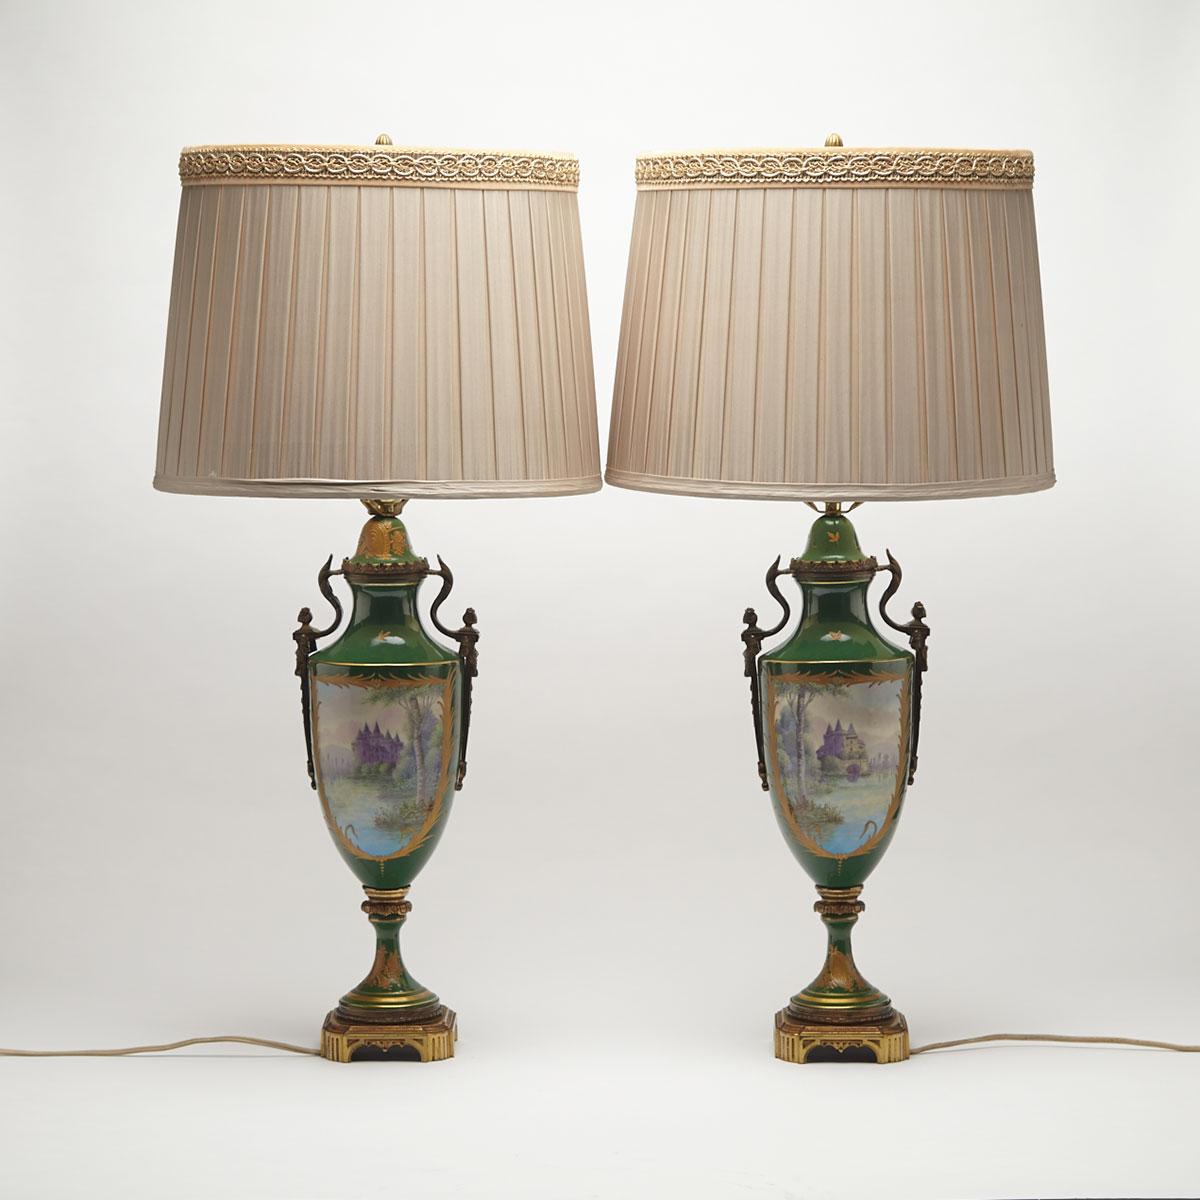 Pair of ‘Sèvres’ Green-Ground Urn-Form Table Lamps, 20th century